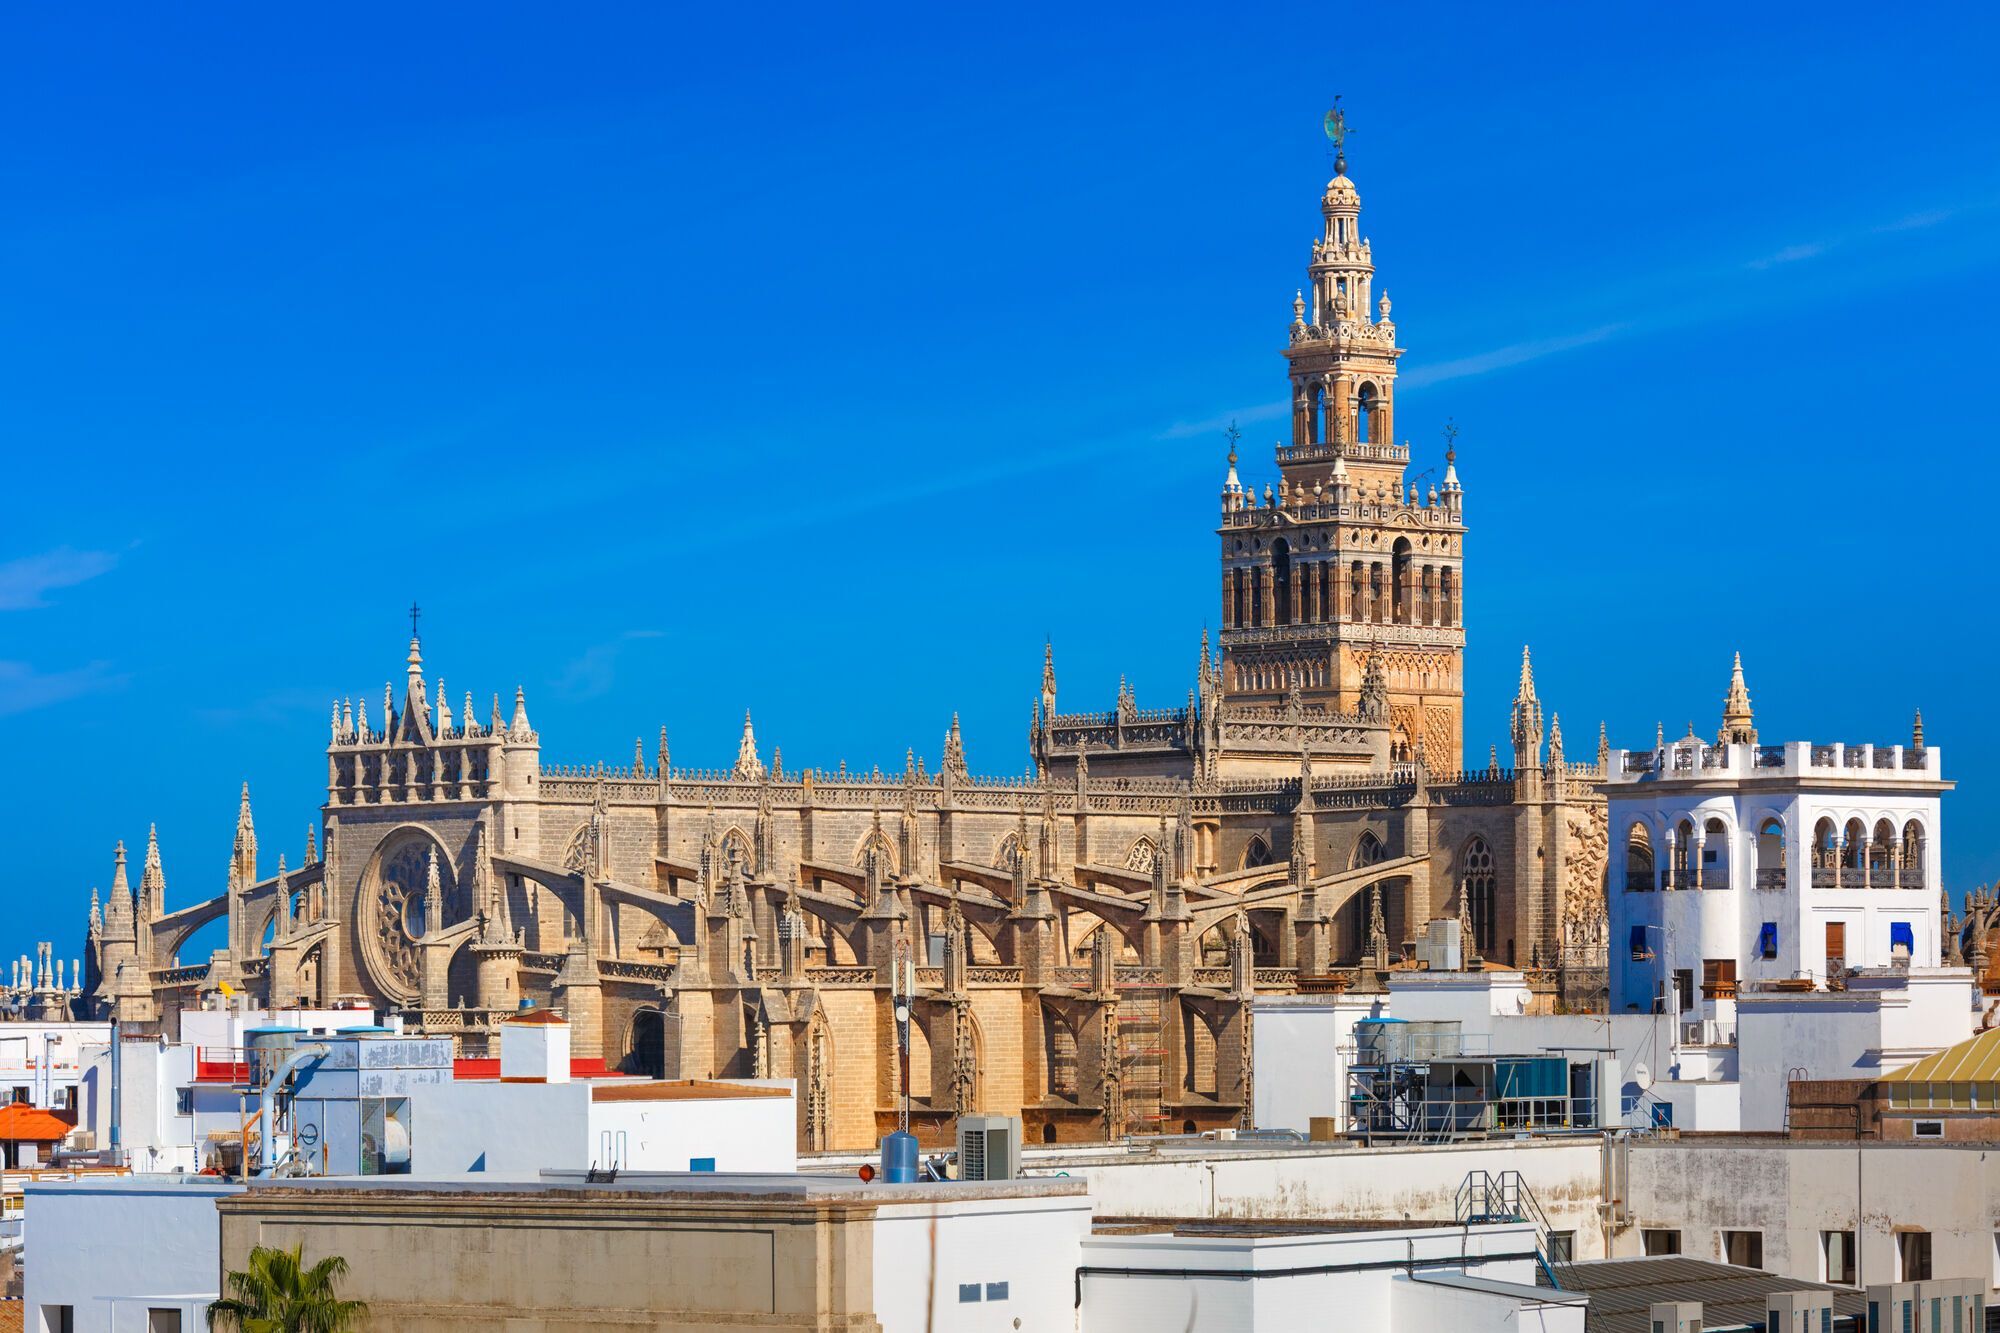 Seville Cathedral built on the site of Almohada mosque